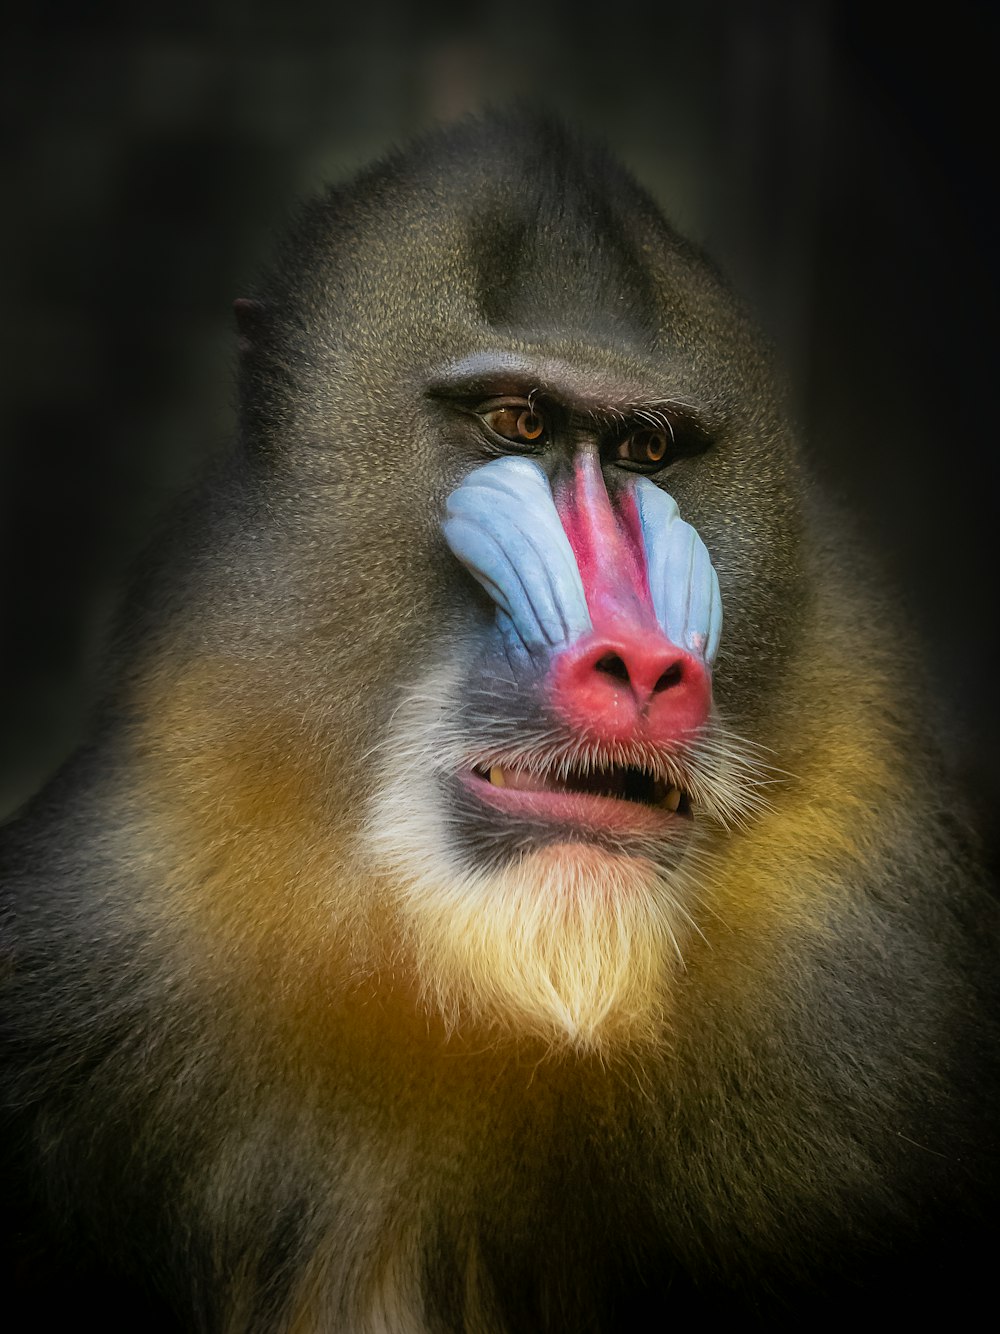 a close up of a monkey with a blue and red nose